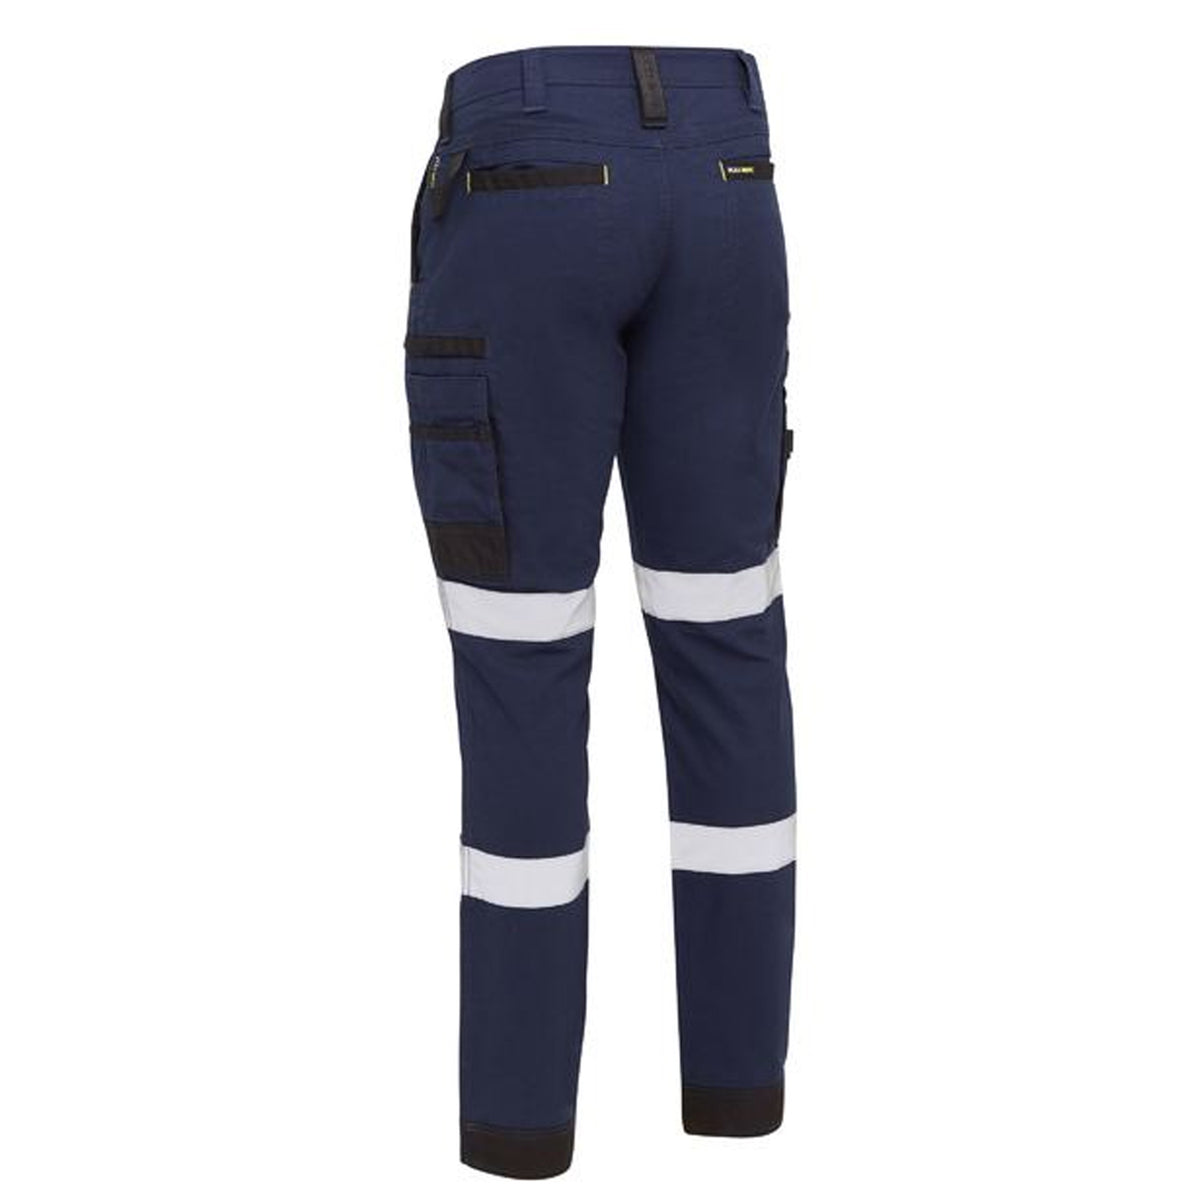 bisley flx and move stretch utility cargo pants in navy